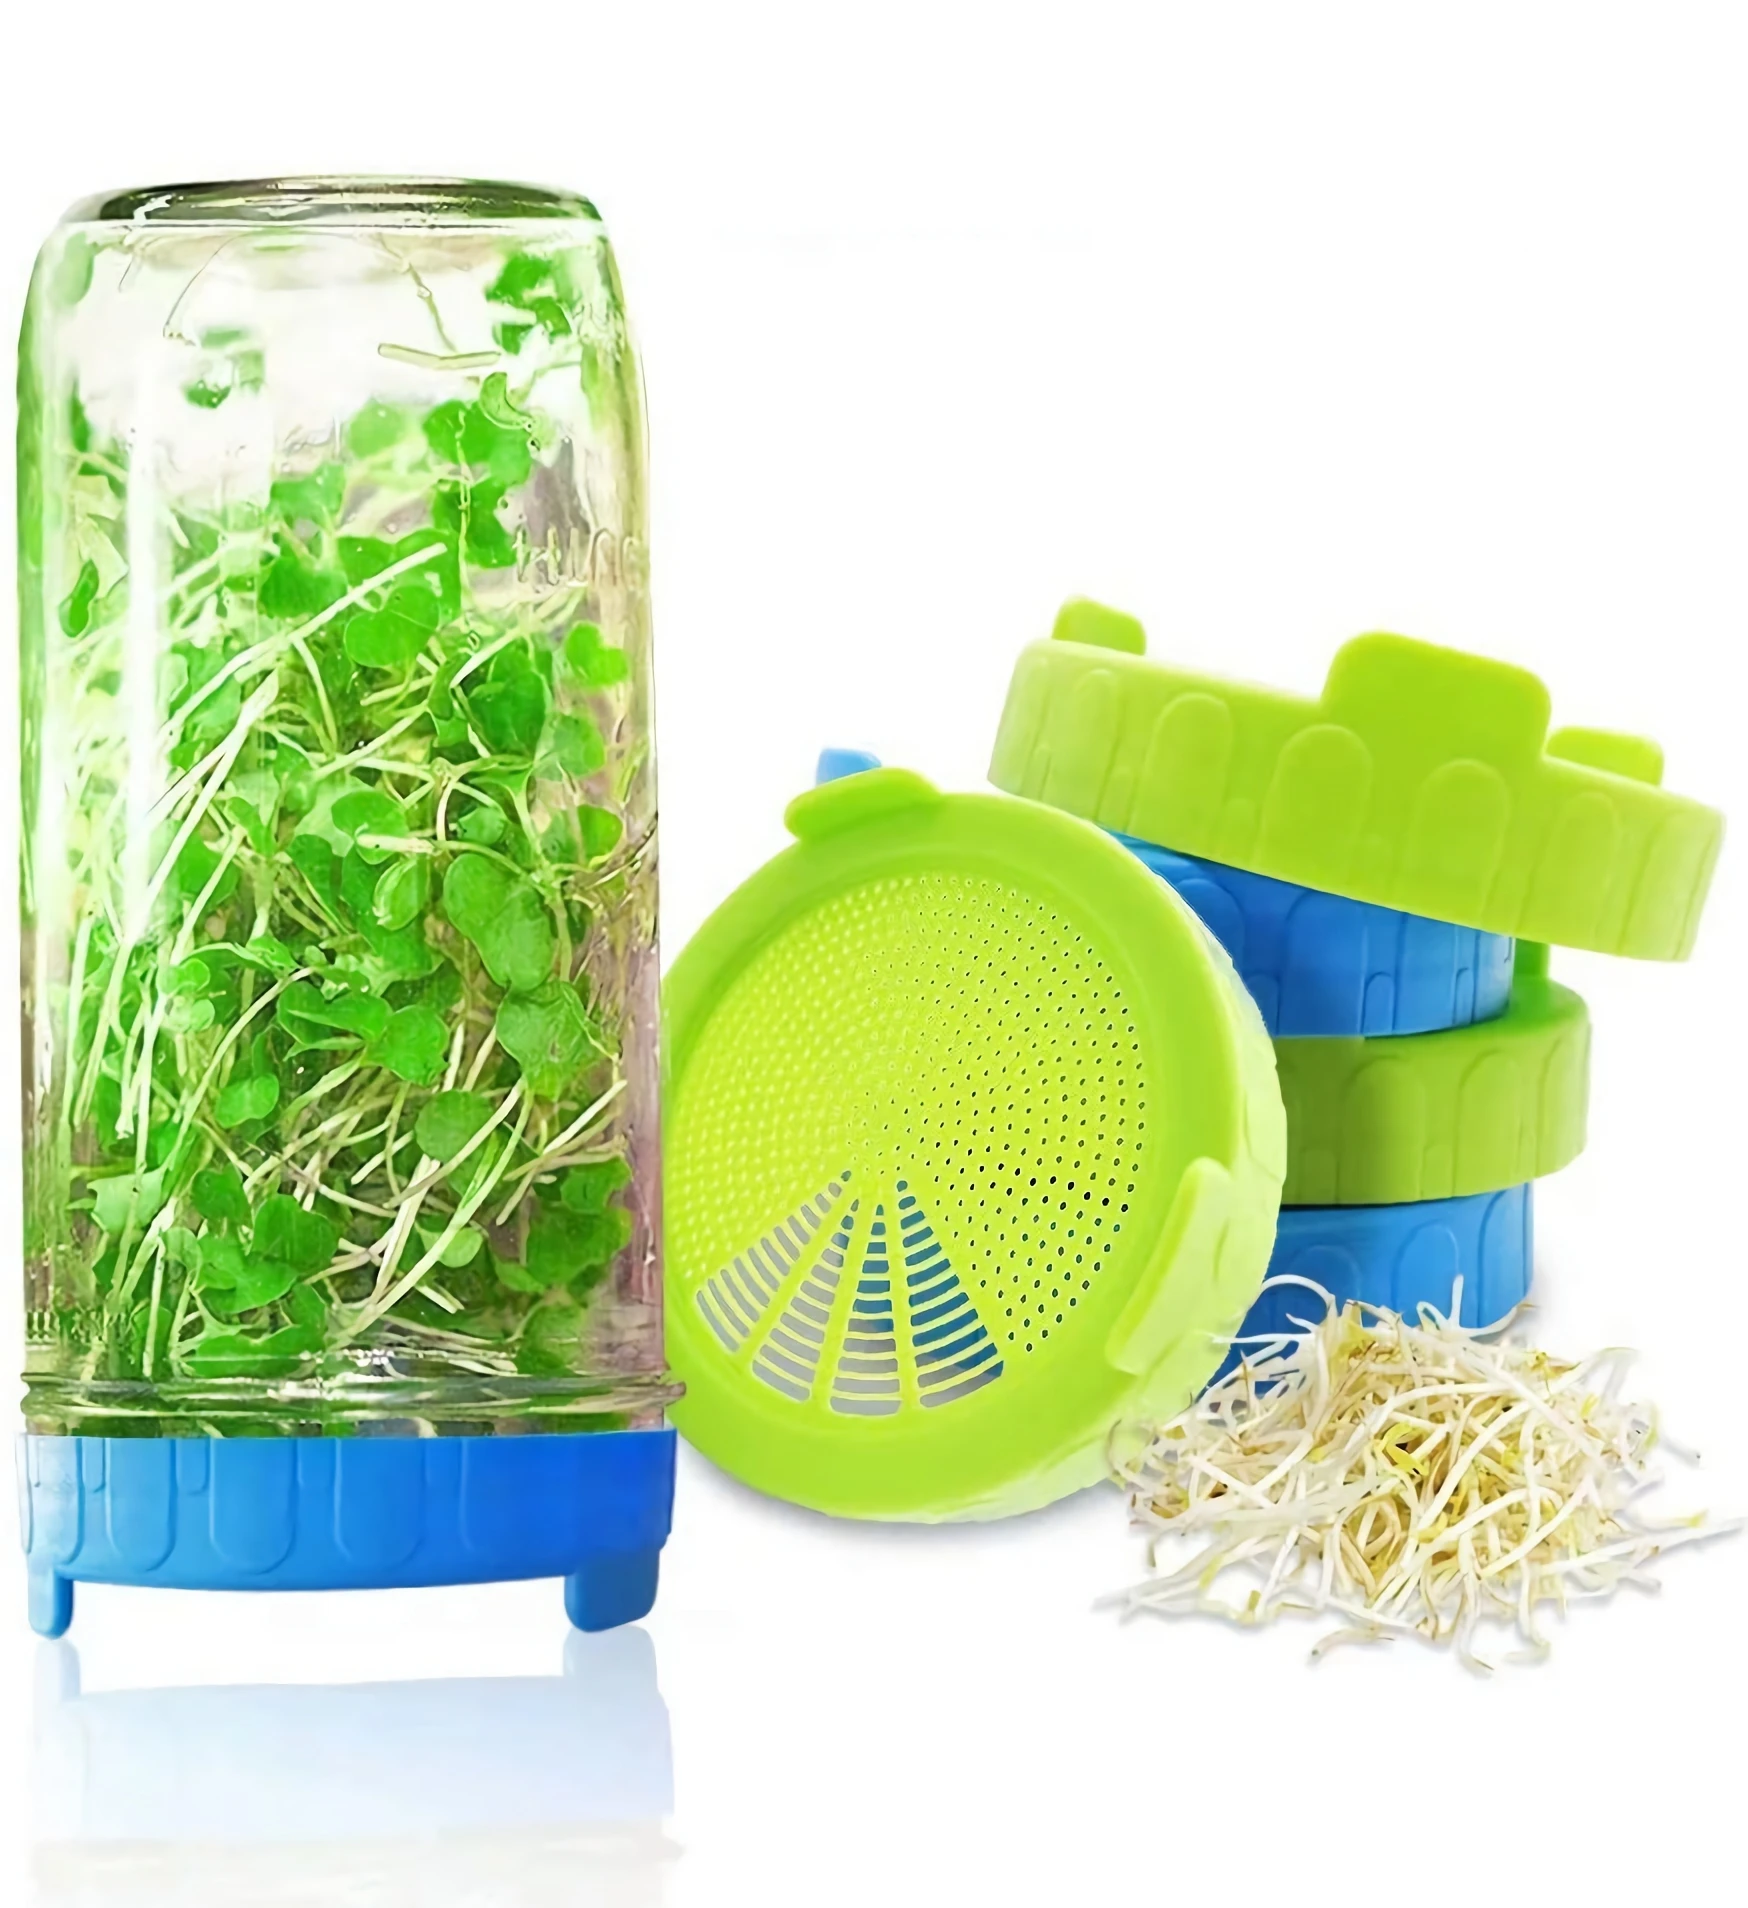 

mason jar sprouting lids for making organic sprouting seeds germination cover bean sprout, Any color